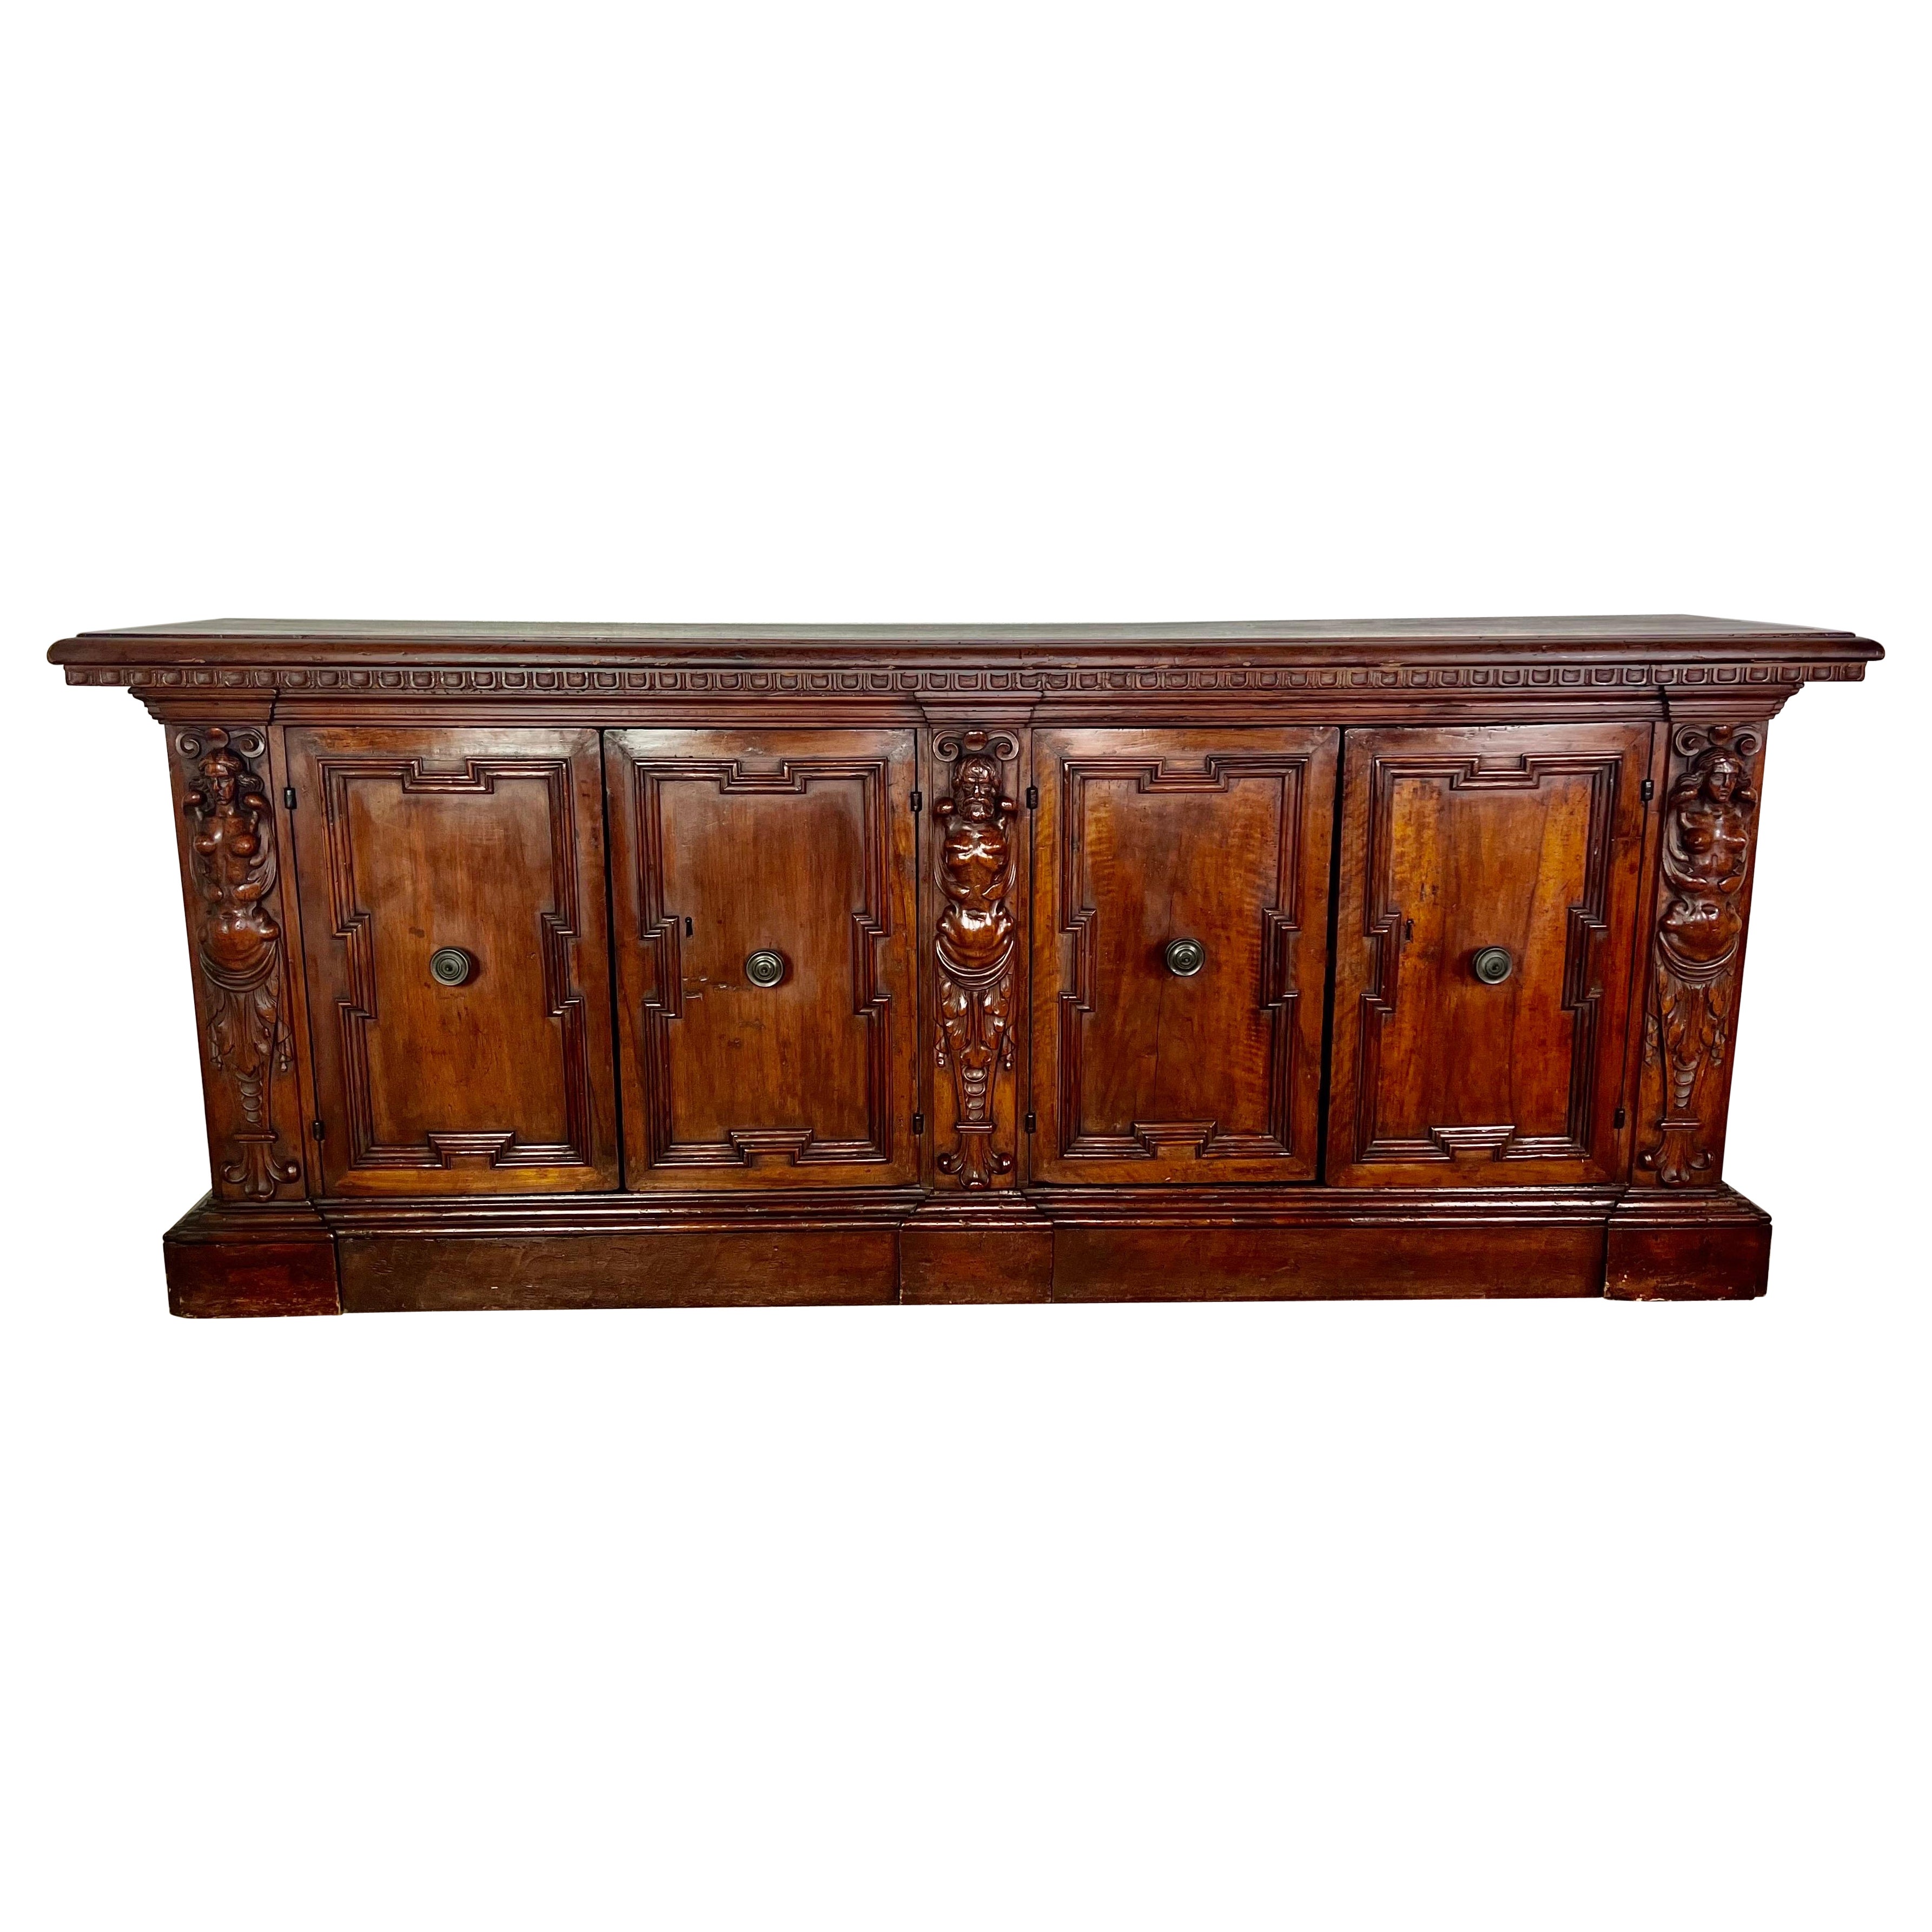 19th Century Walnut Italian Credenza with Intricate Carving Throughout For Sale